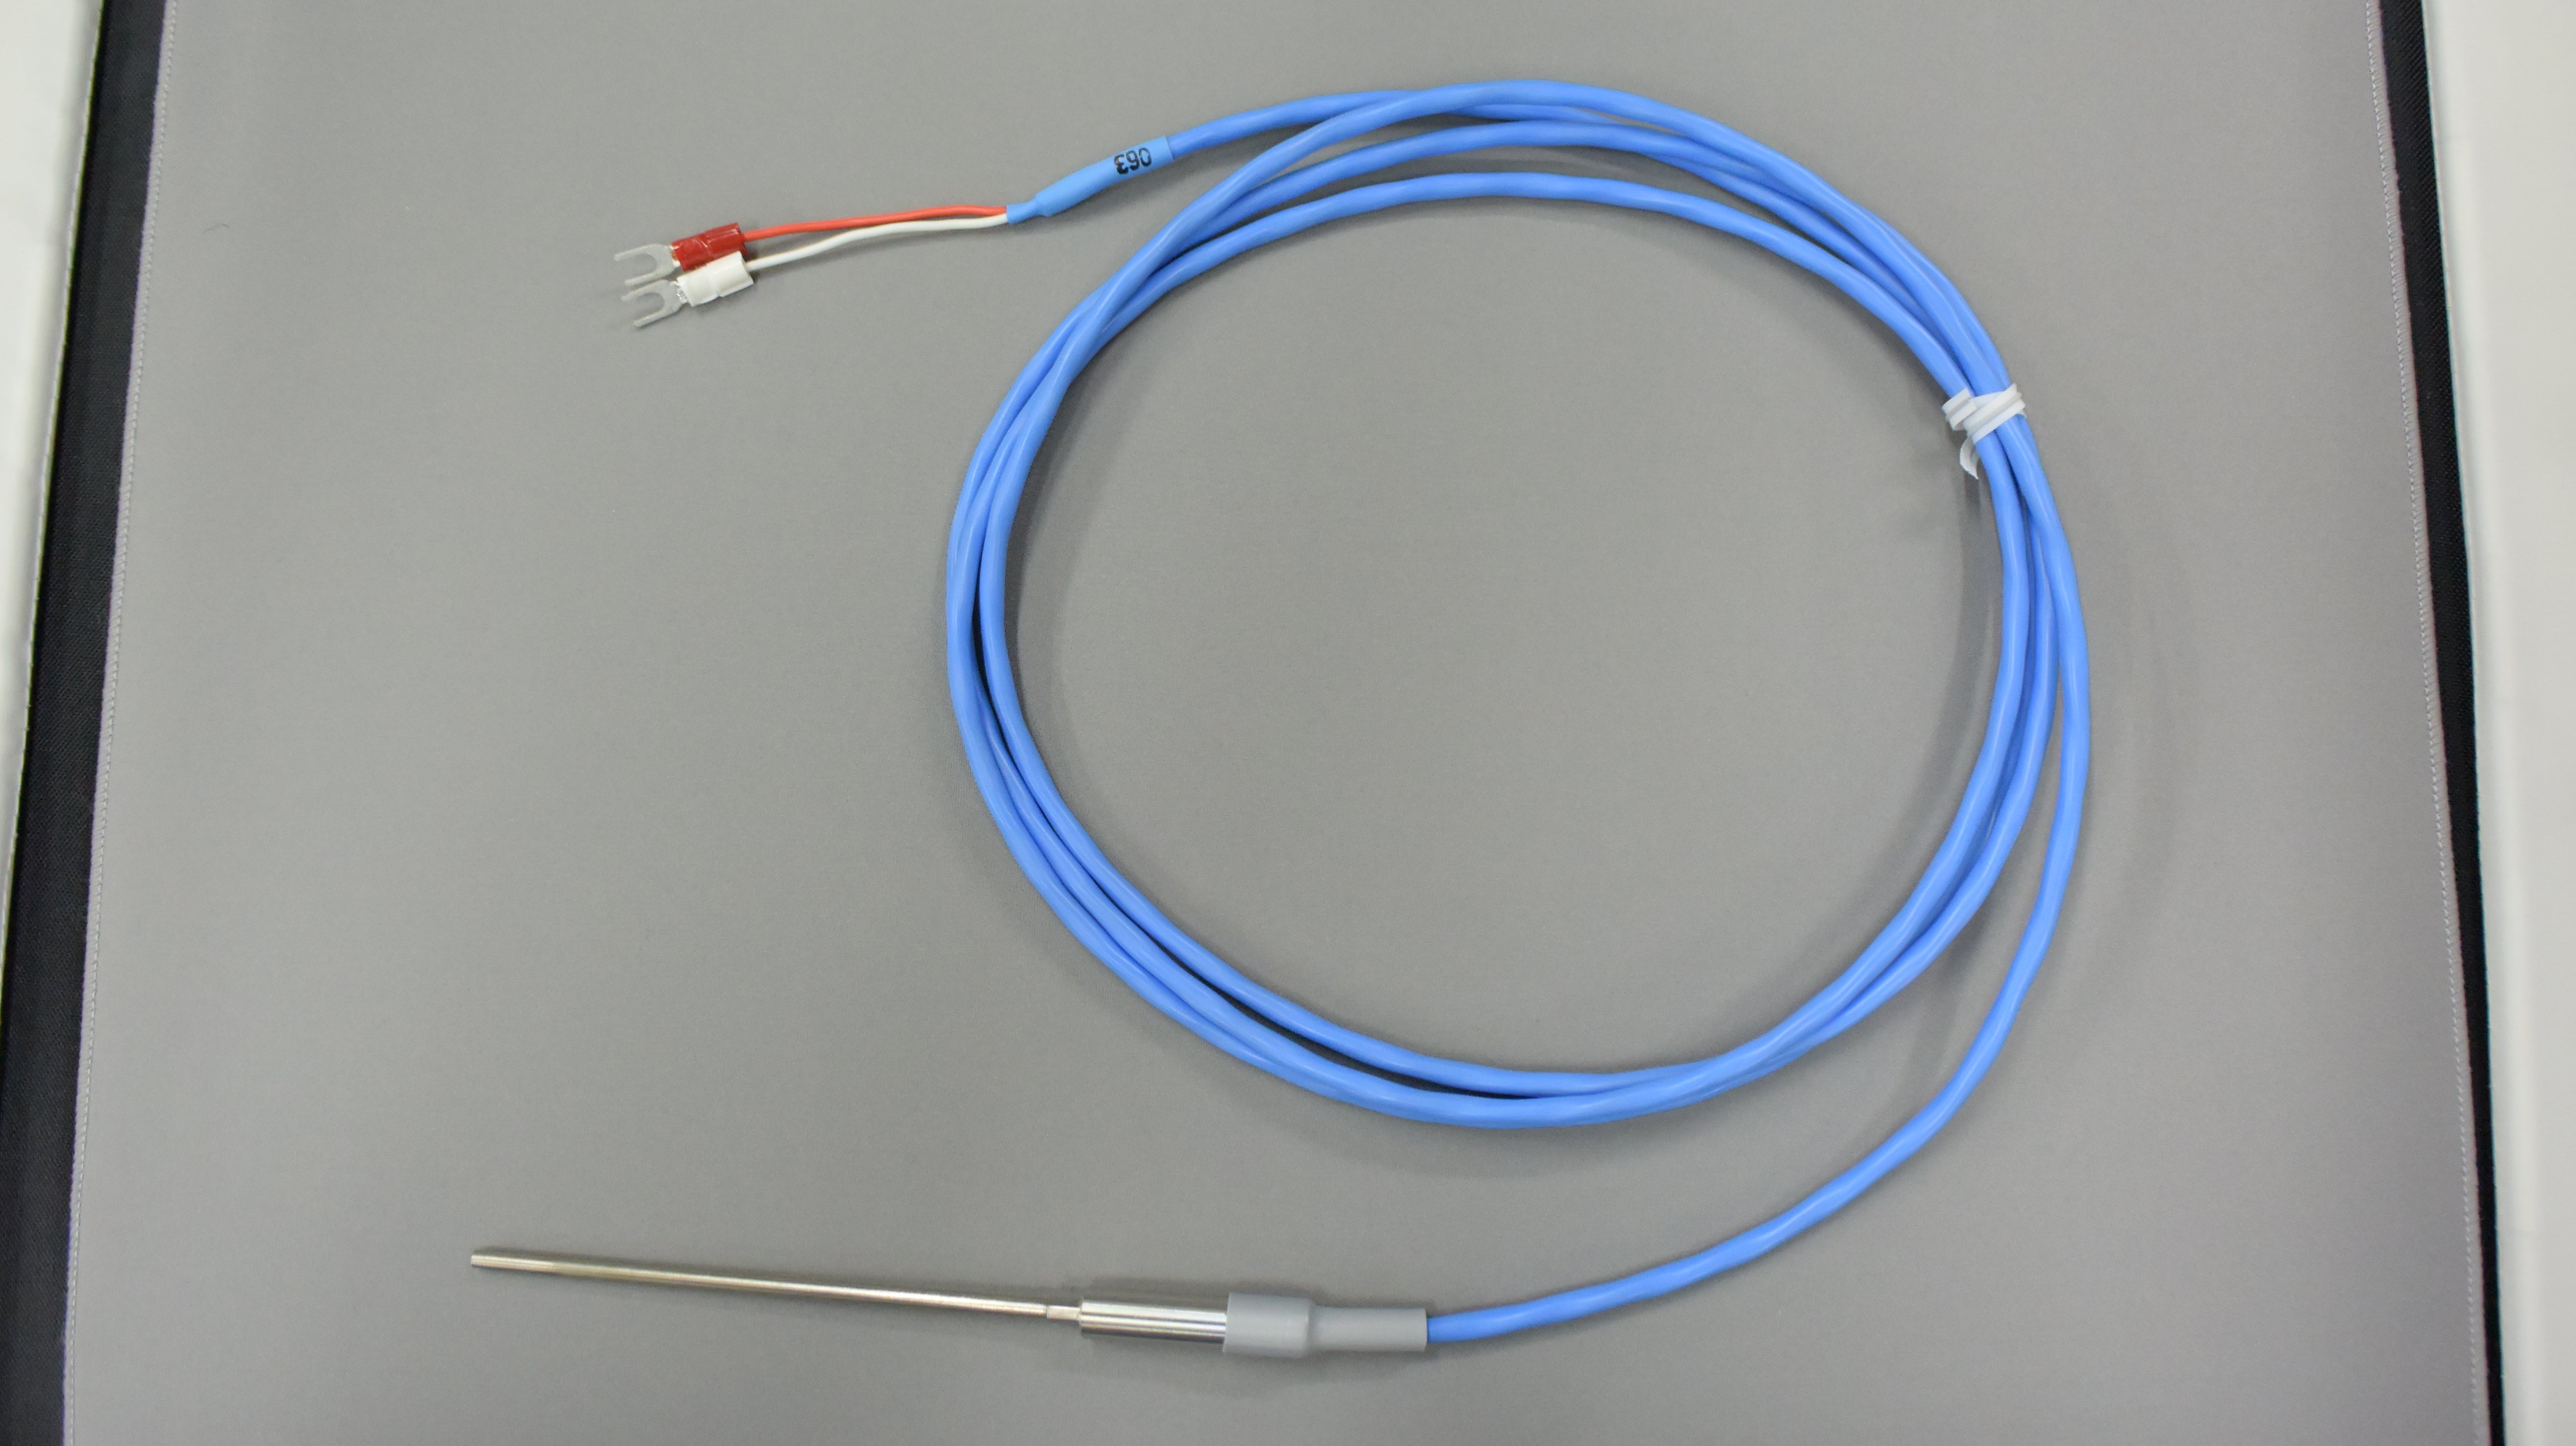 Thermocouple (Type K) "Sheathed Type" (silicone coated) Max. operating temp: 180°C (sleeve 80°C), Tolerance: Class 2 (±2.5°C or ±0.75%)